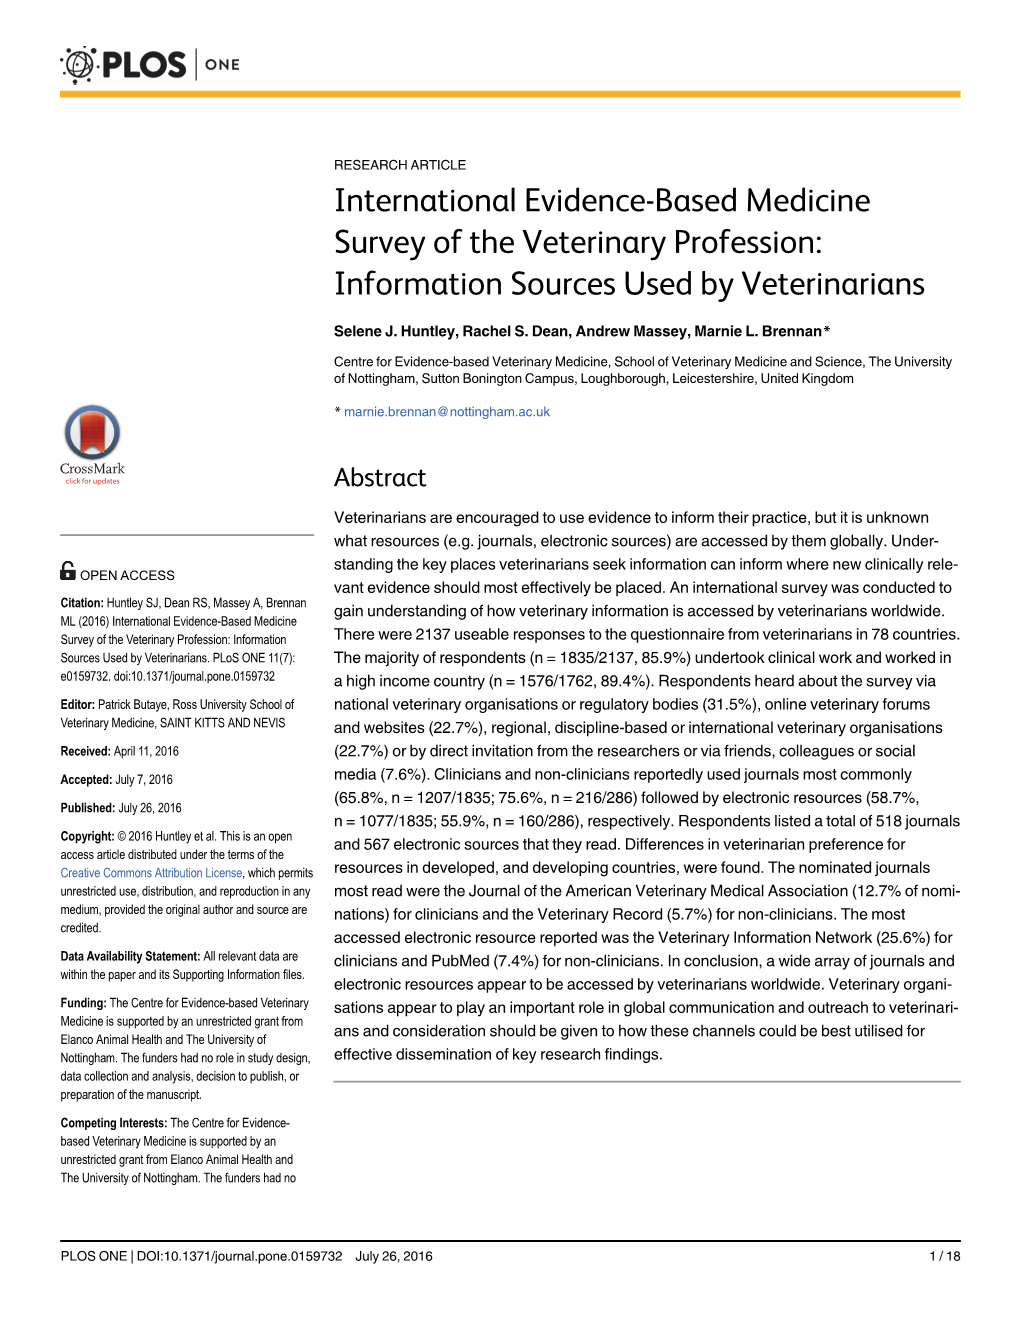 International Evidence-Based Medicine Survey of the Veterinary Profession: Information Sources Used by Veterinarians